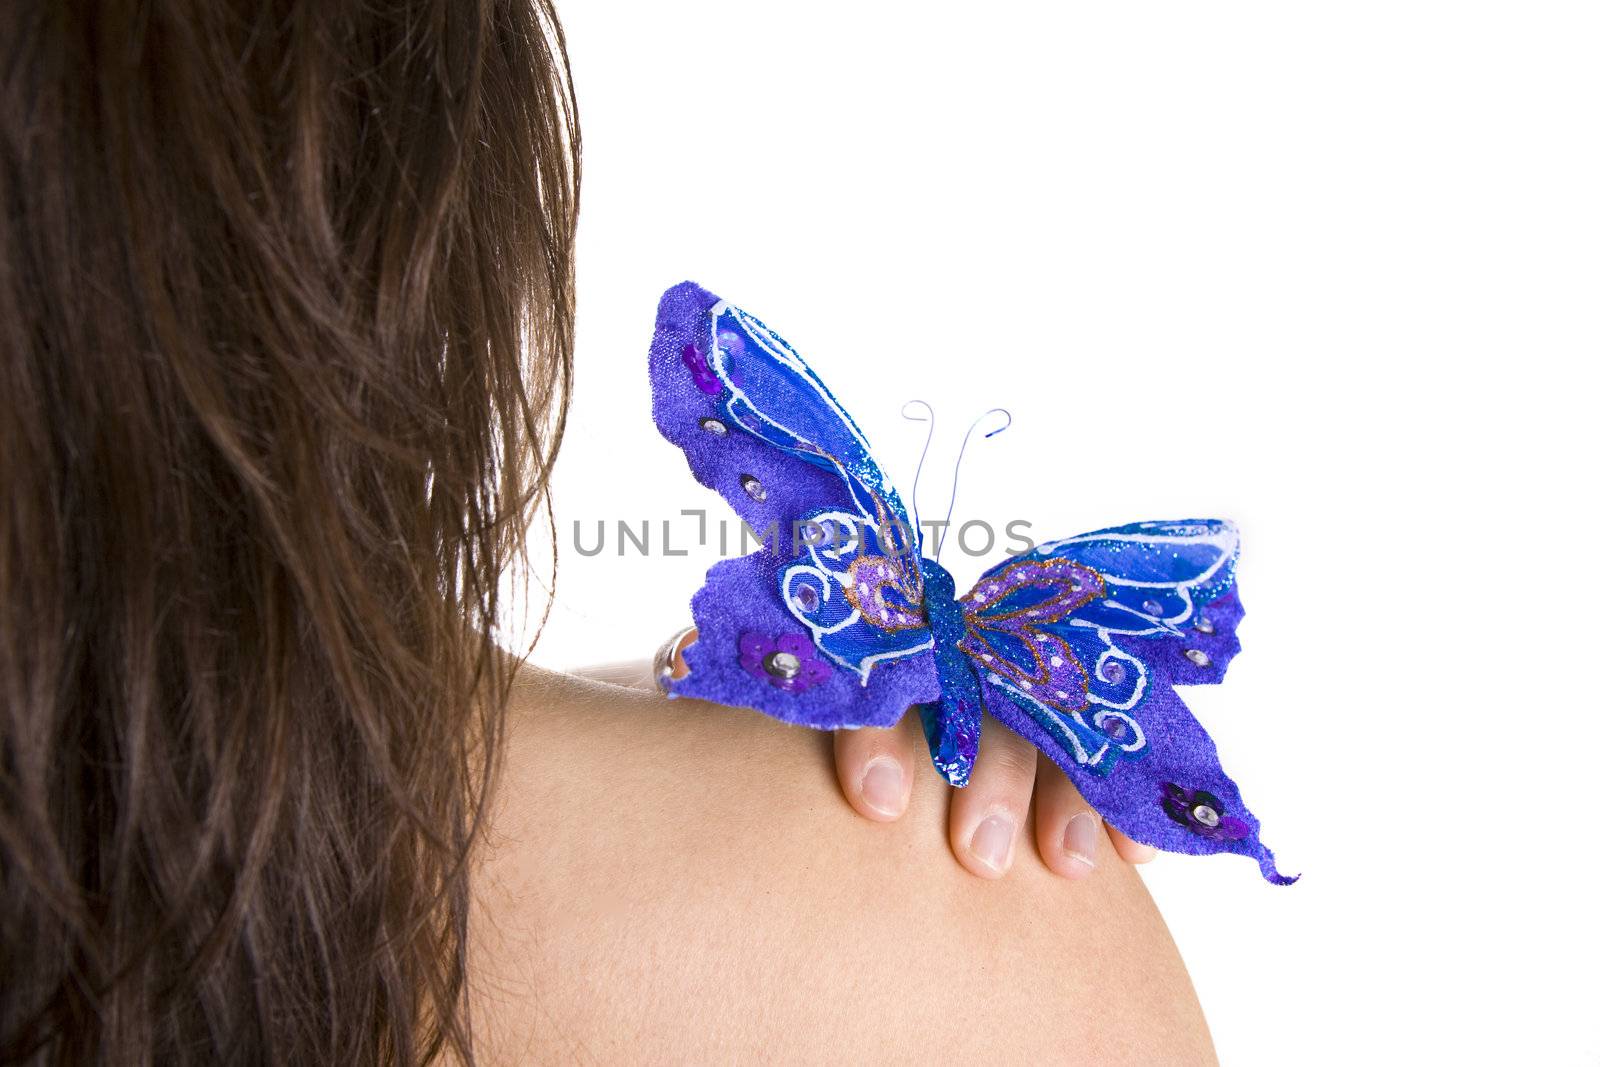 blue butterfly resting on woman naked shoulder - focus is on the by mlopes